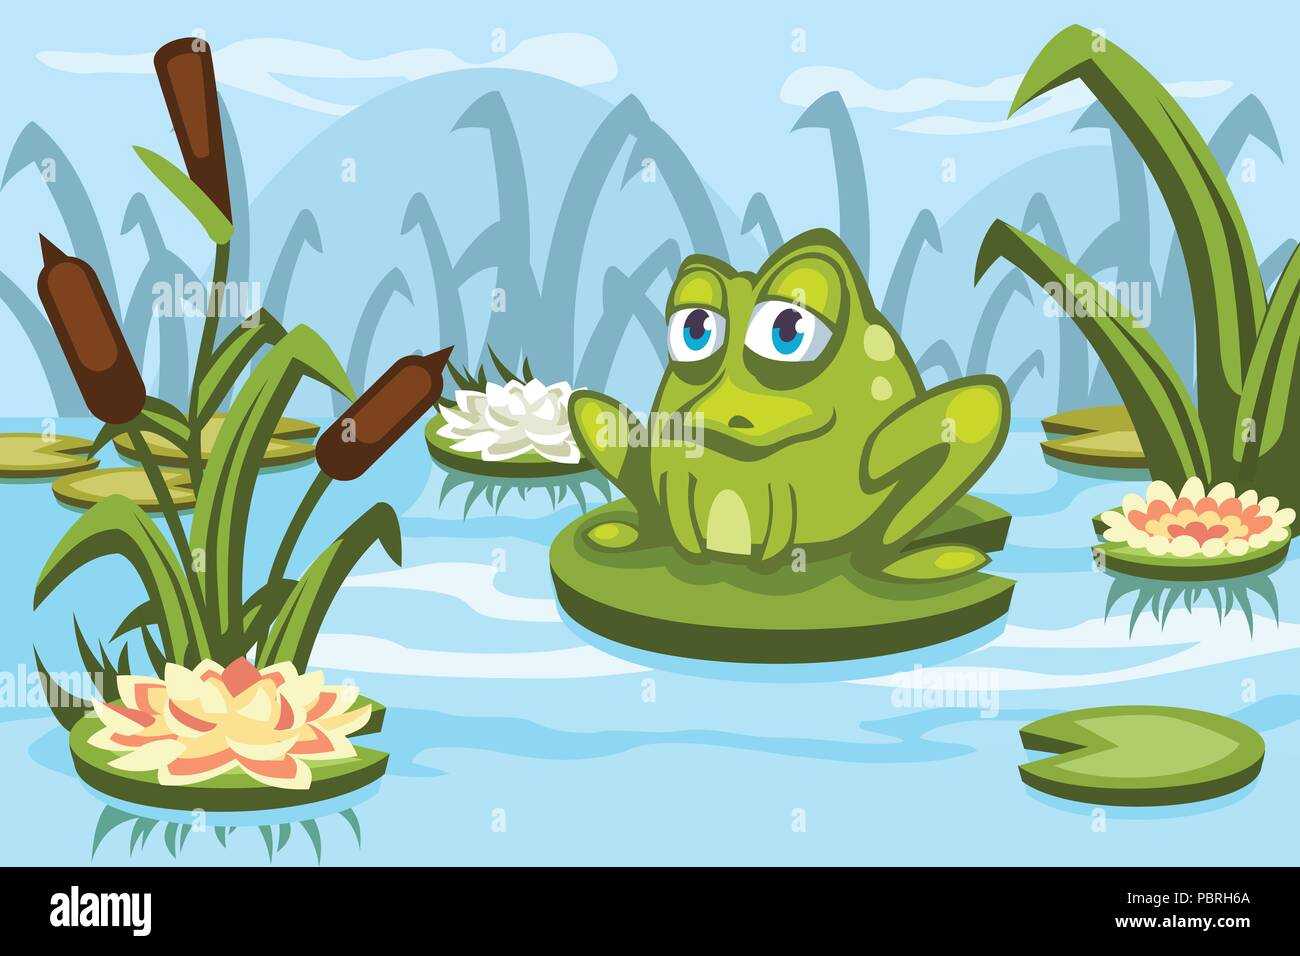 Illustration of a cartoon frog sitting on a water lily in the swamp Stock Vector